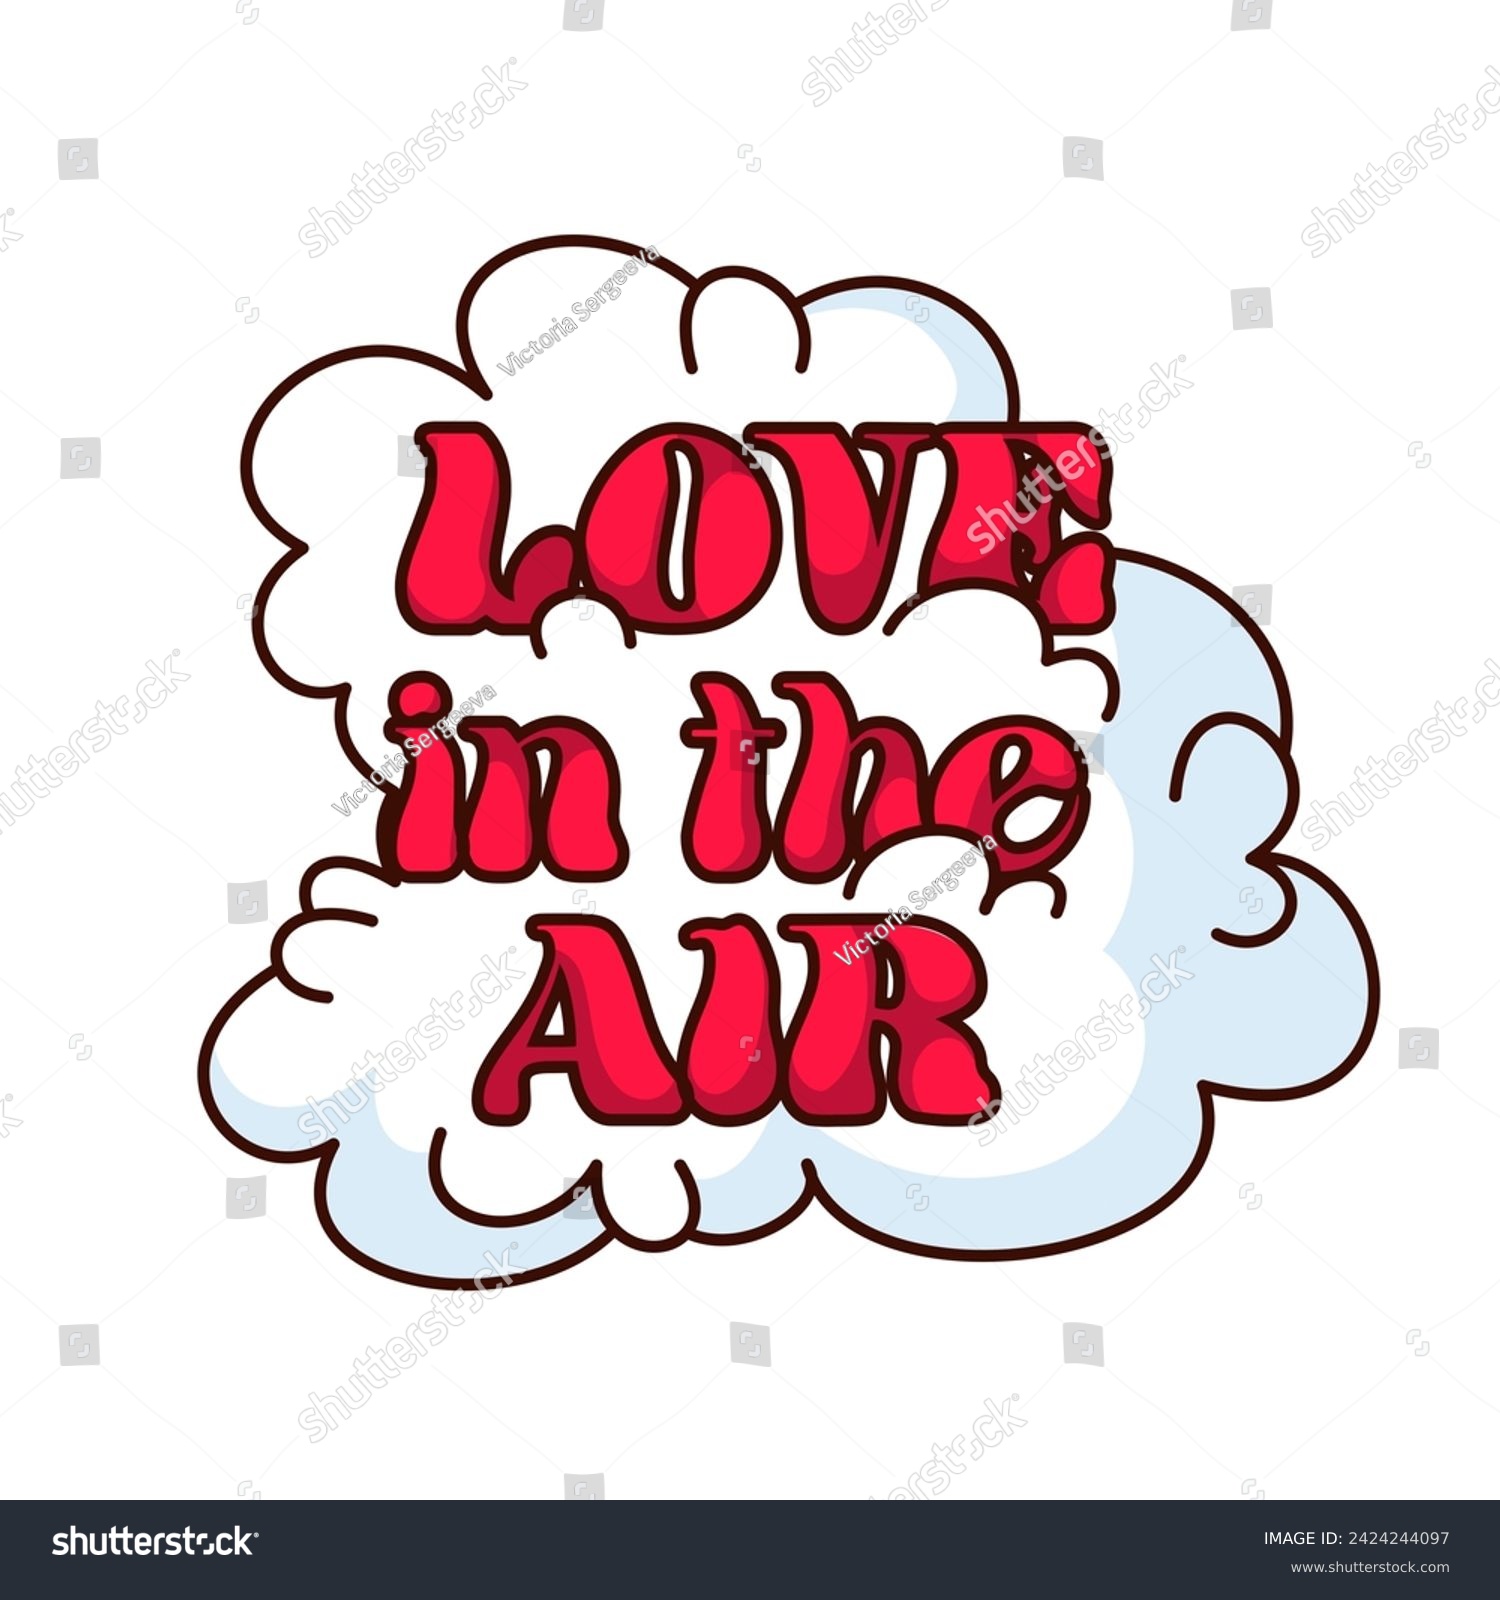 SVG of Groovy sticker with Love in the Air slogan vector illustration. Cartoon isolated retro quirky badge with clouds and text, love and wellbeing quote, positive saying svg